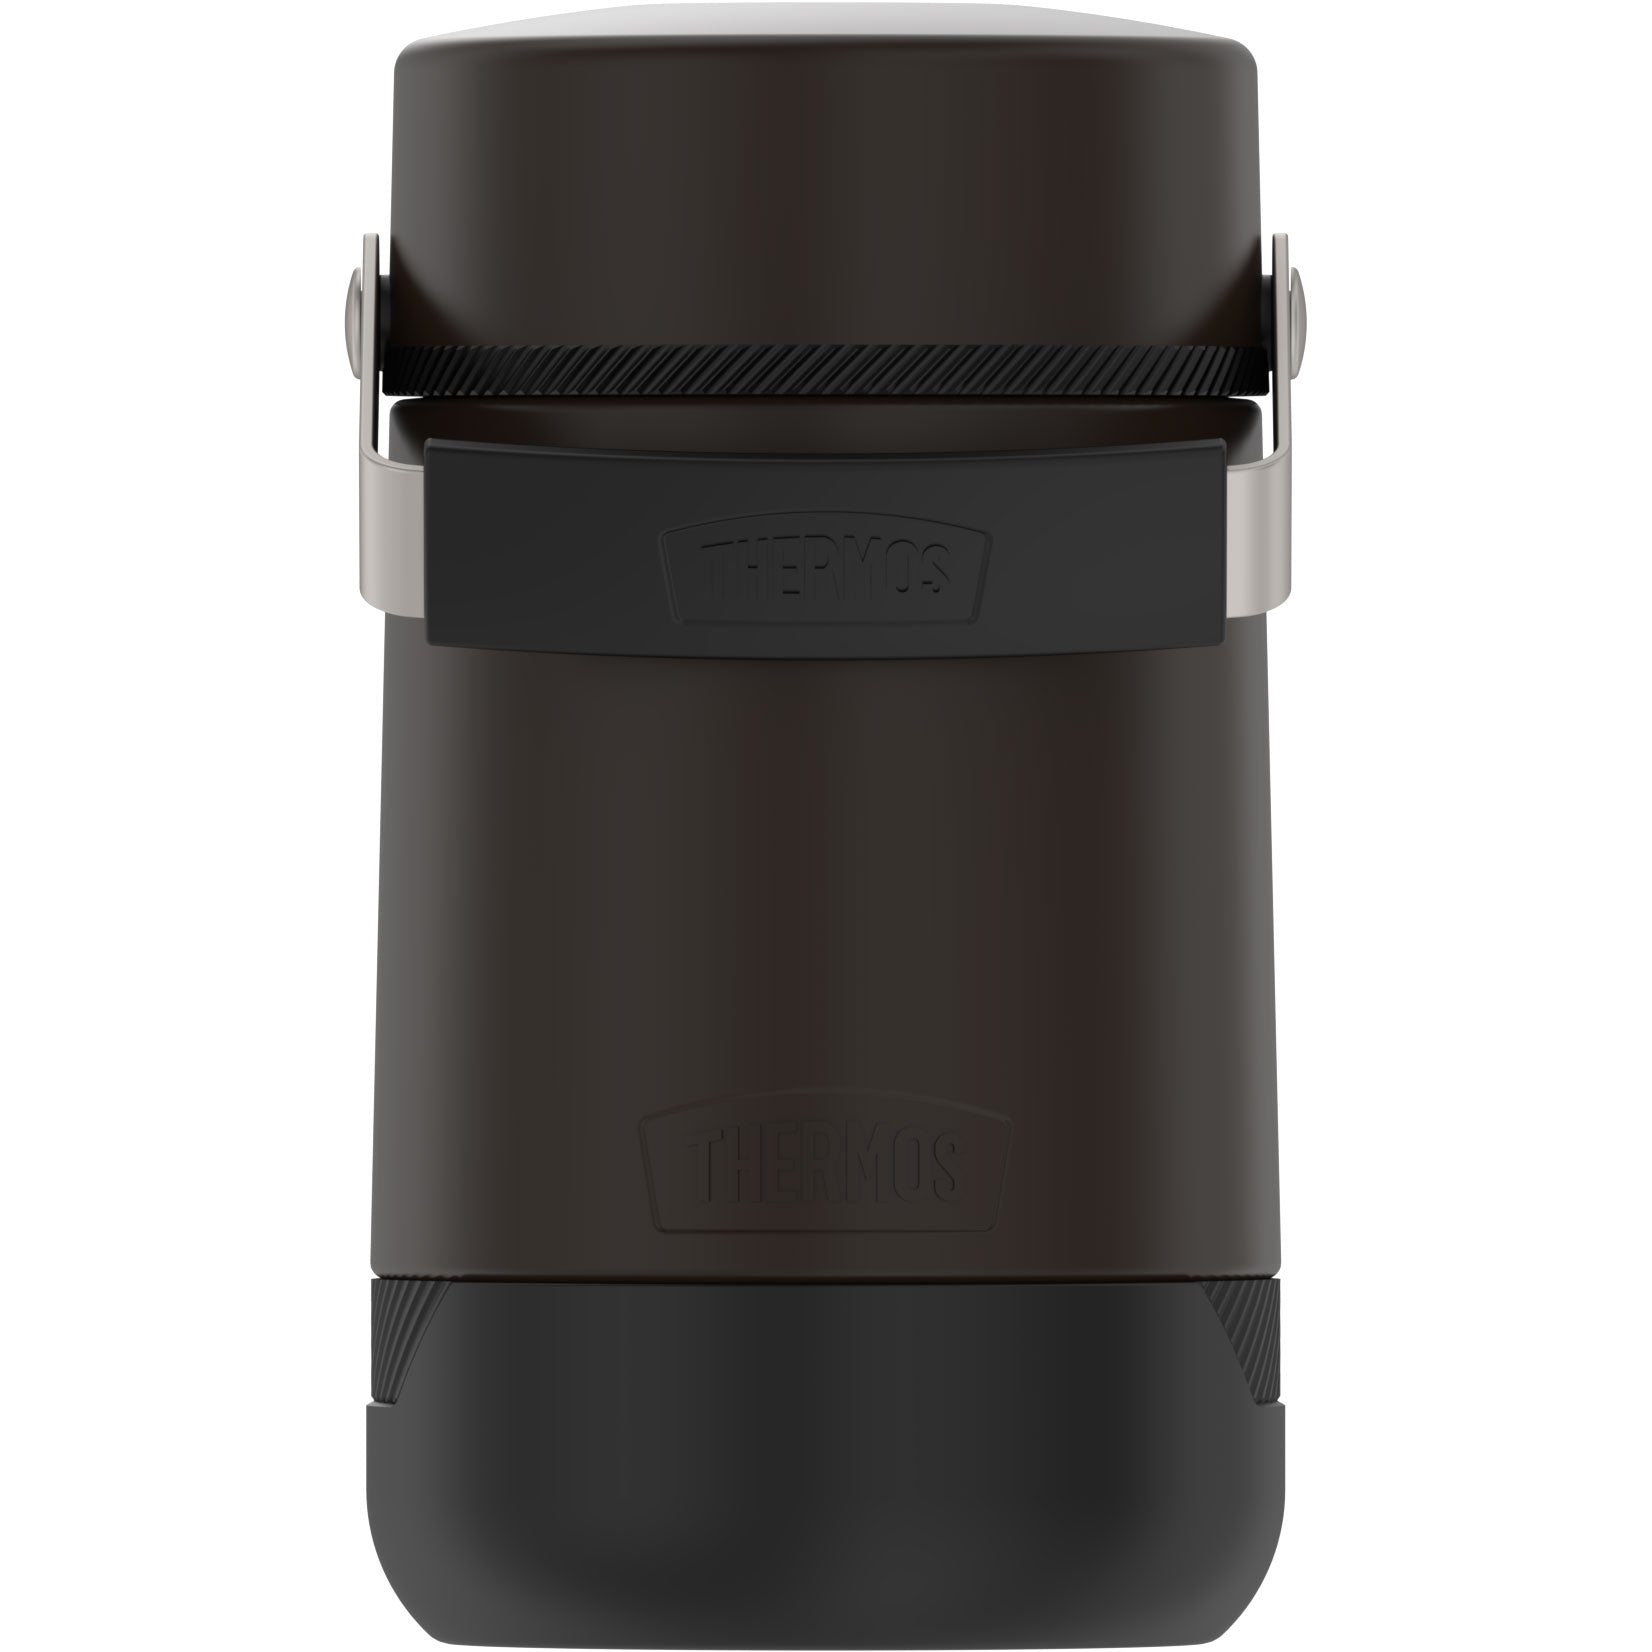 Thermos Guardian Collection 27oz Stainless Steel Food Jar - Matte Black